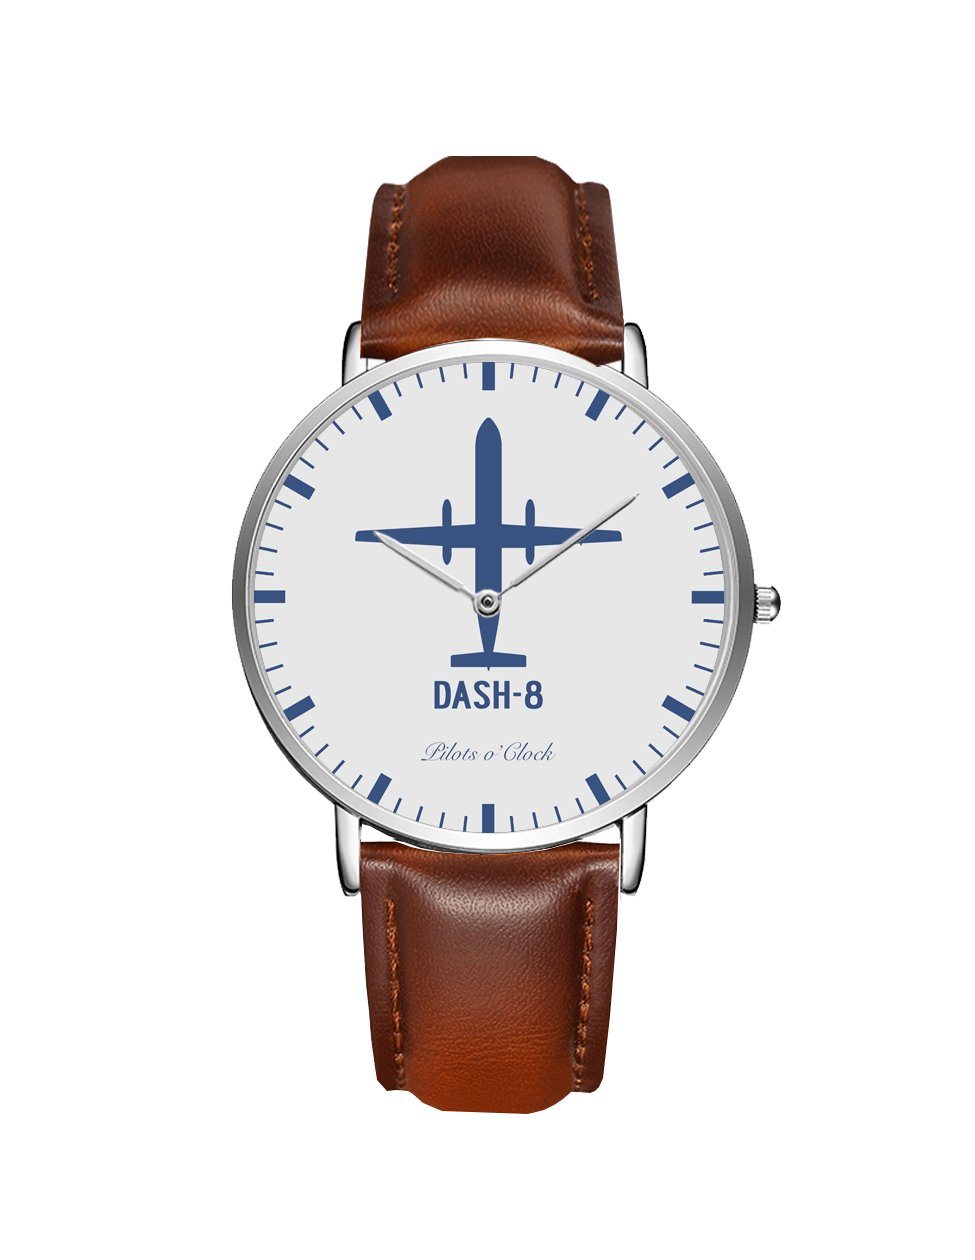 Bombardier Dash-8 Leather Strap Watches Pilot Eyes Store Silver & Brown Leather Strap 